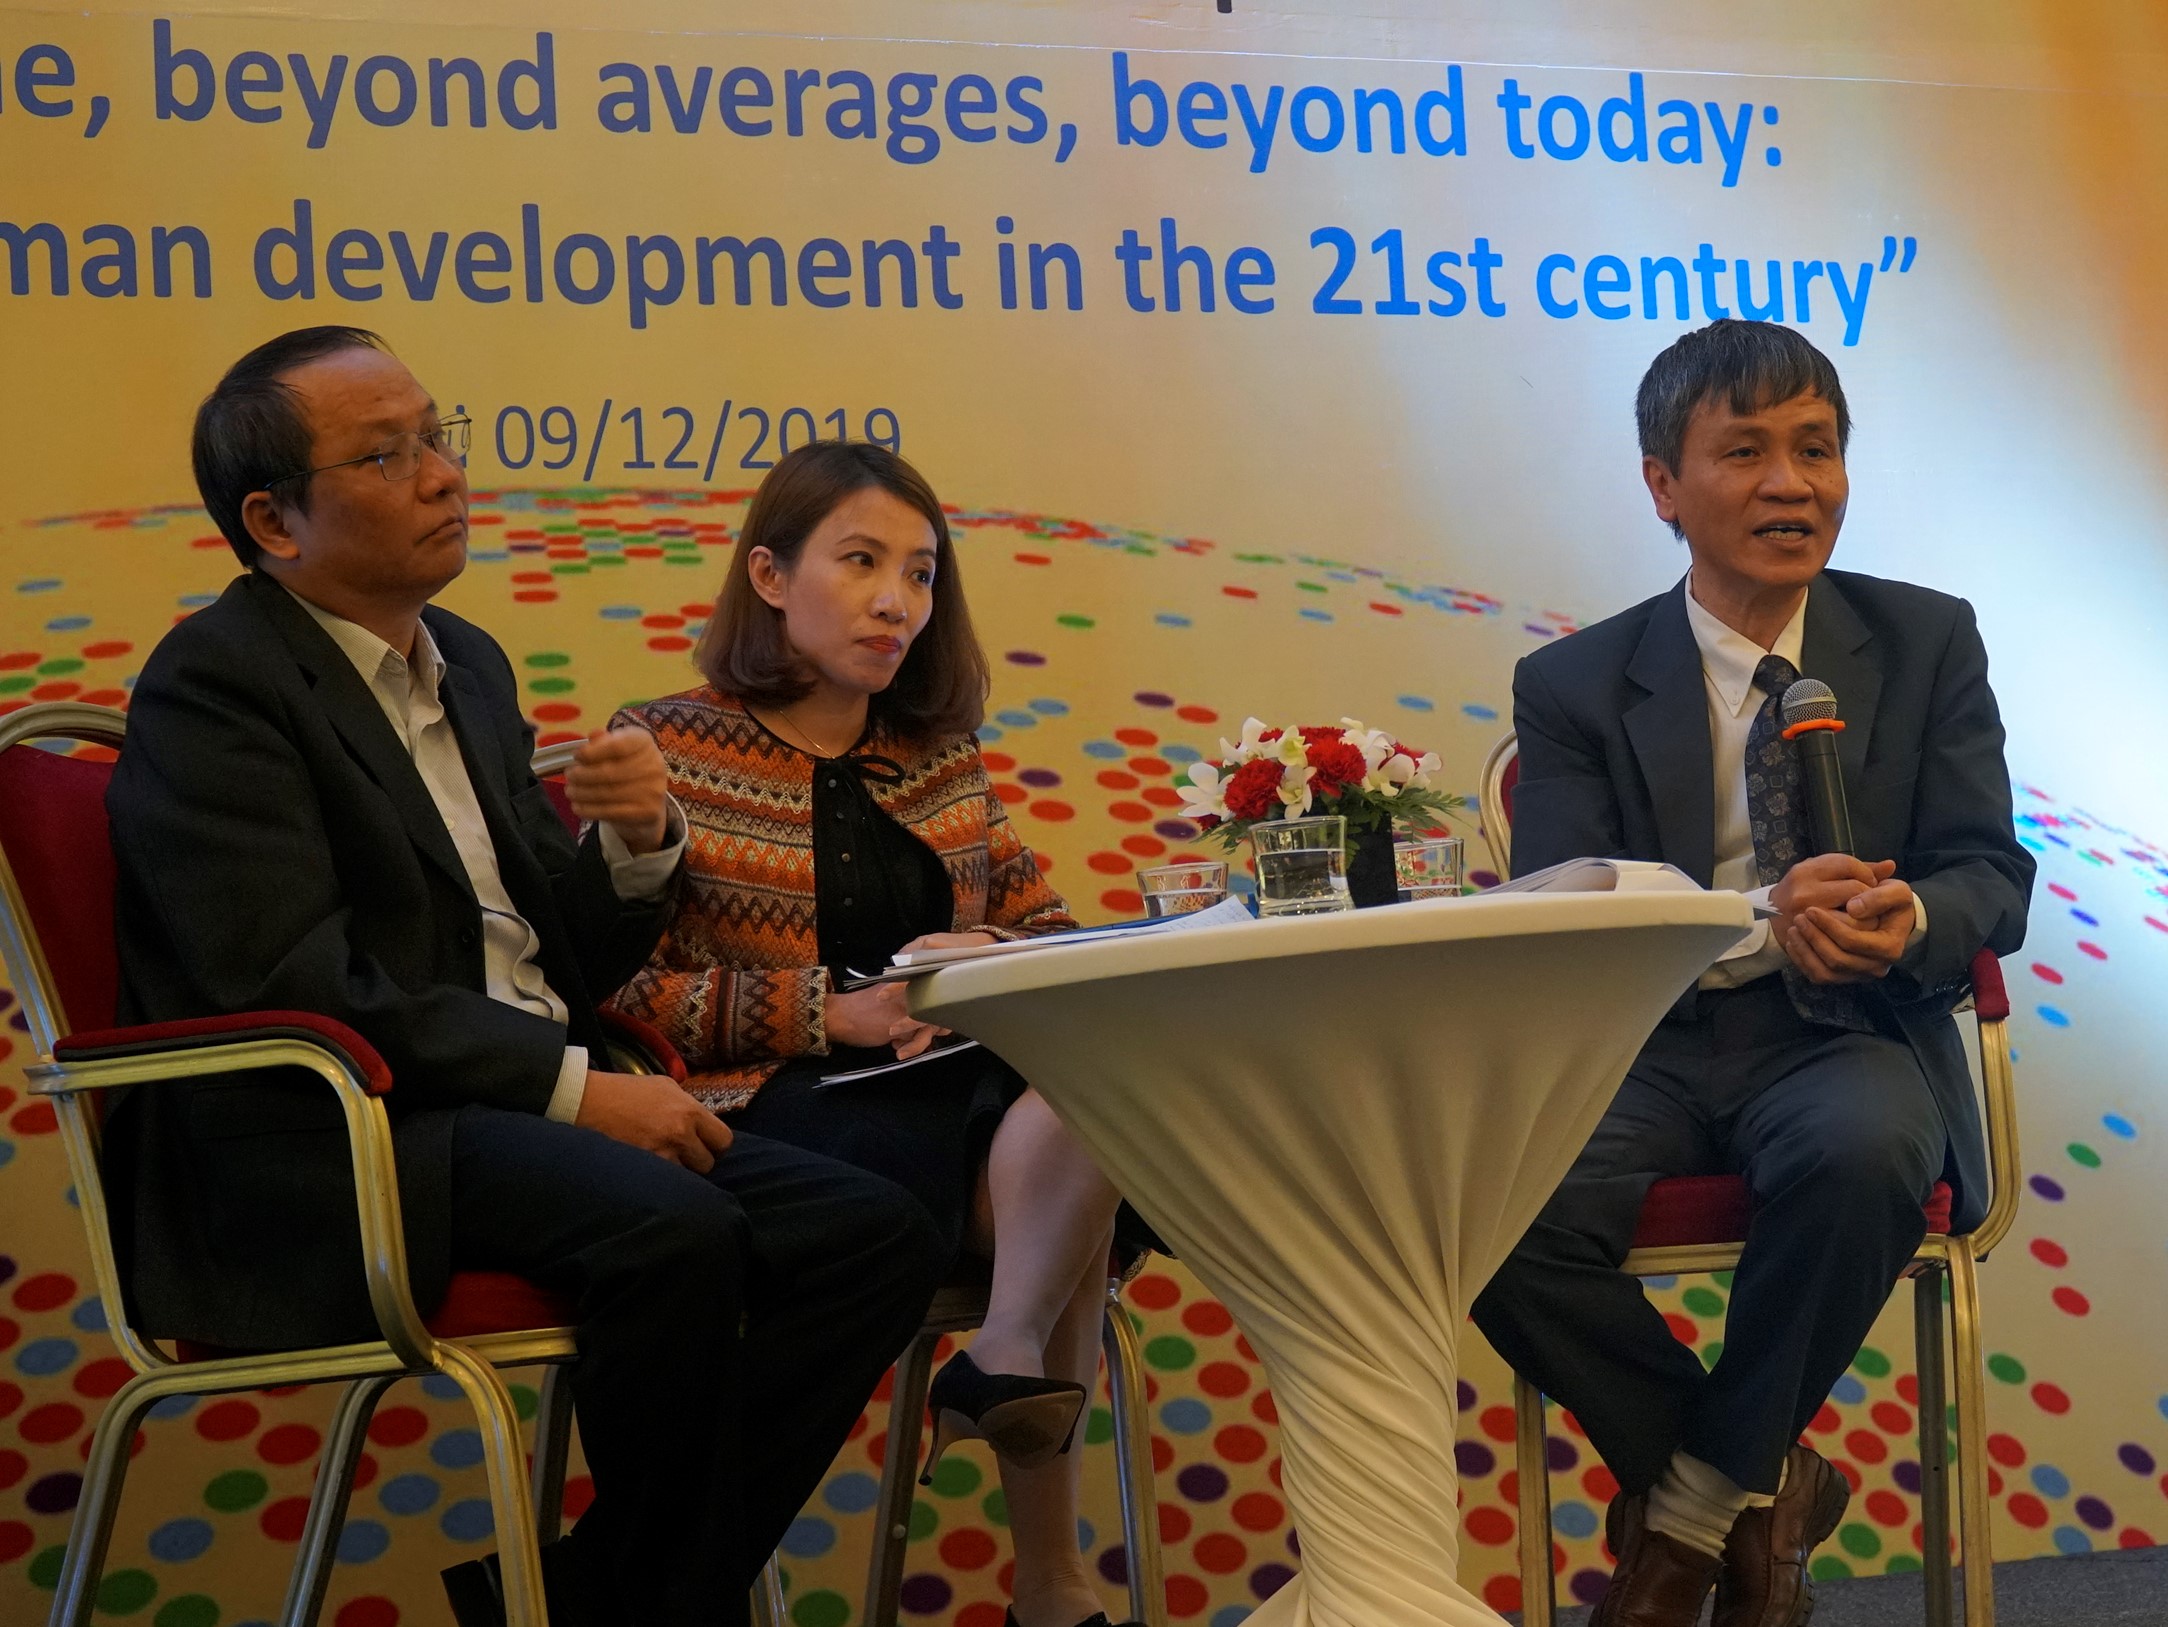 Viet Nam has made significant Human Development progress with low increases in inequality